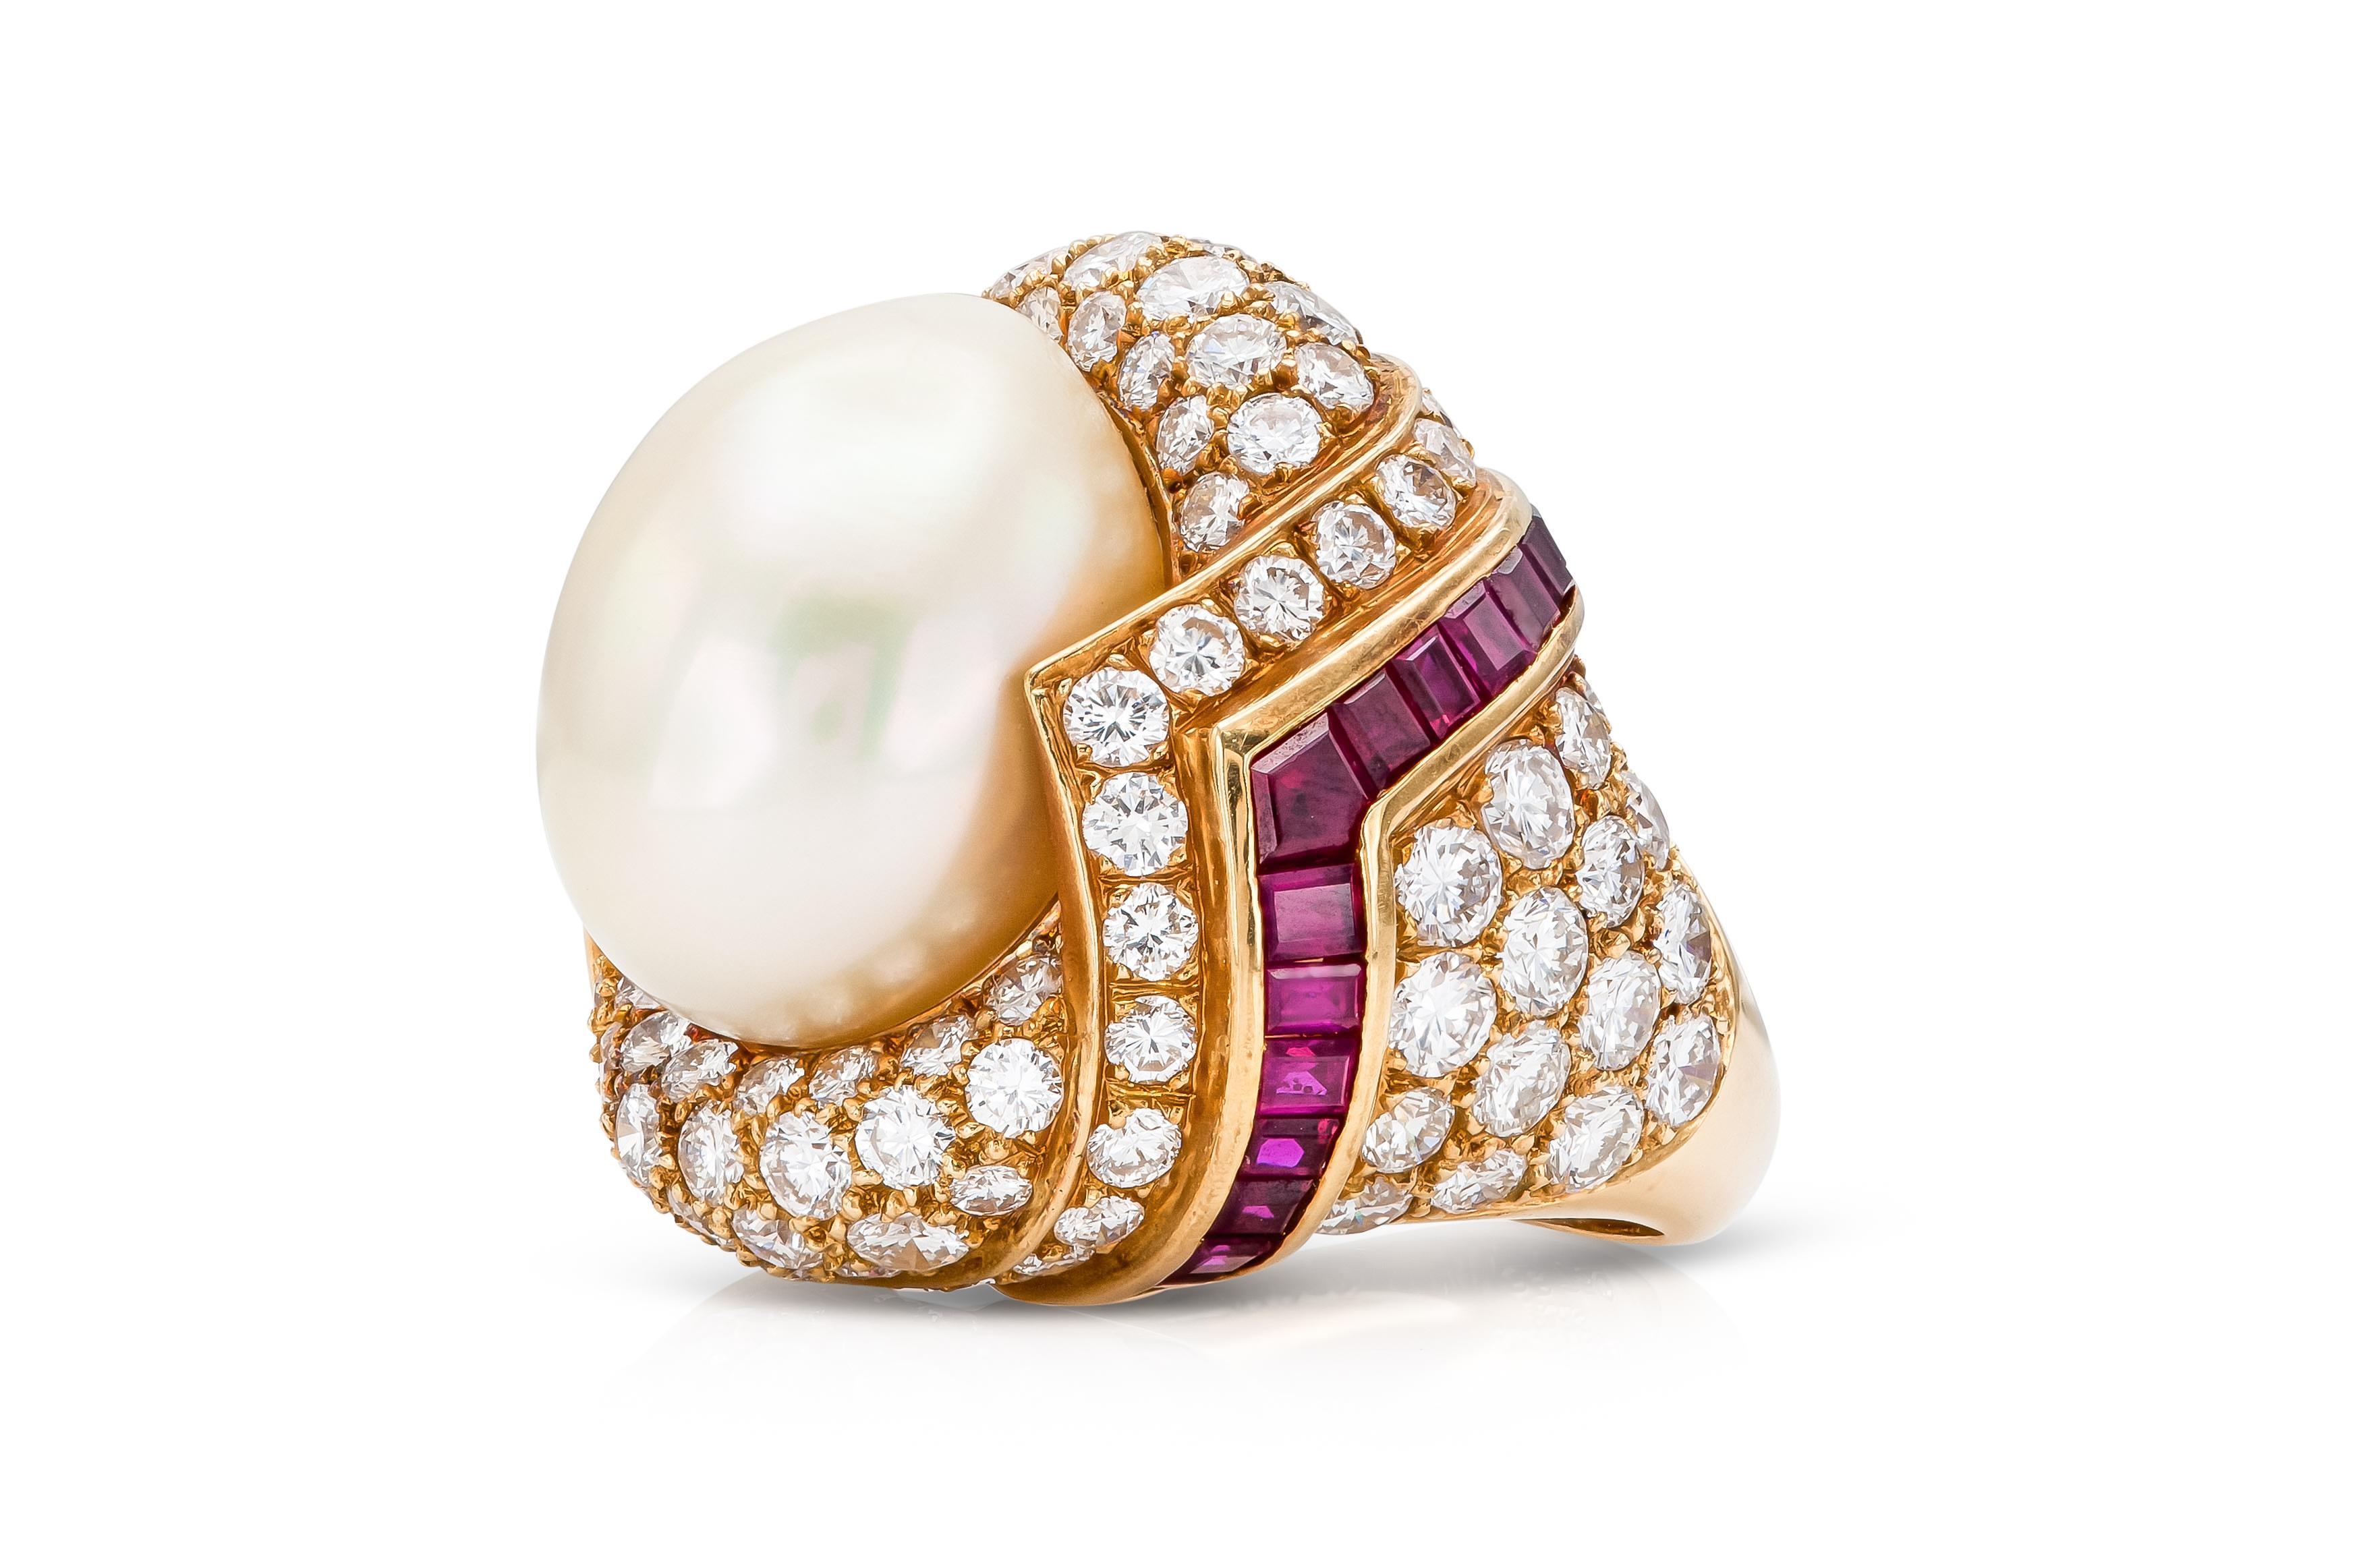 Finely crafted in 18k yellow gold with a GIA certified Oval South Sea Pearl measuring 18.50 x 13.88mm. The ring features Round Brilliant cut Diamonds weighing approximately a total of 8.00 carats and Square cut Rubies.
Signed by Mauboussin
Size 6